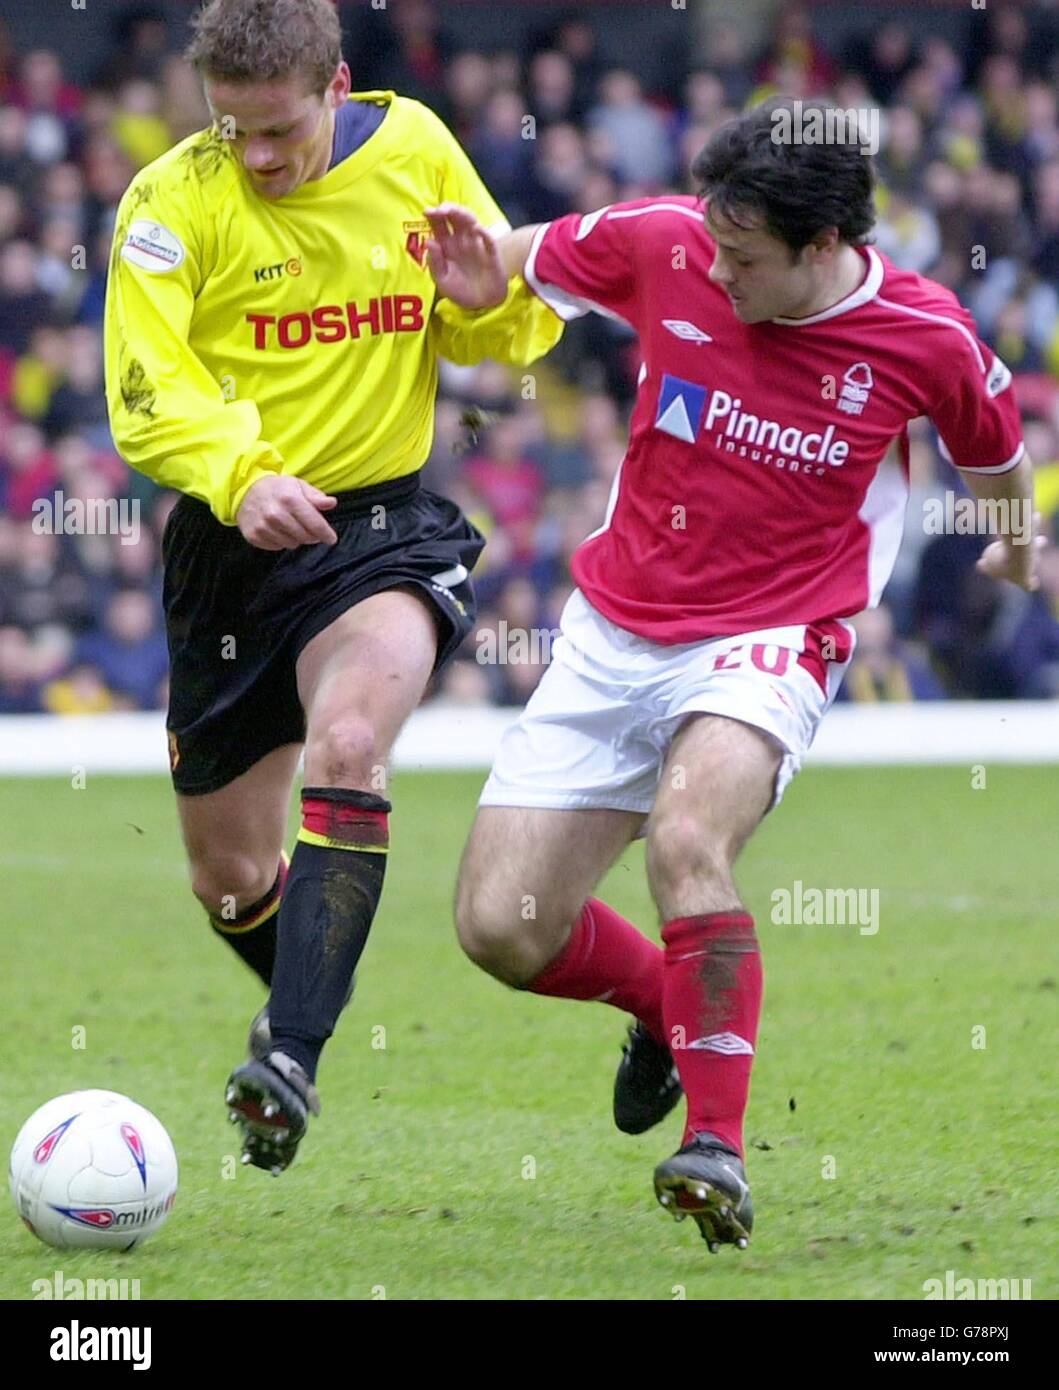 Watford's Neal Ardley (L) is challenged by Nottingham Forest's Andy Reid during the Nationwide Division One match at Vicarage Road, Watford. The game ended a 1-1- draw. NO UNOFFICIAL CLUB WEBSITE USE. Stock Photo